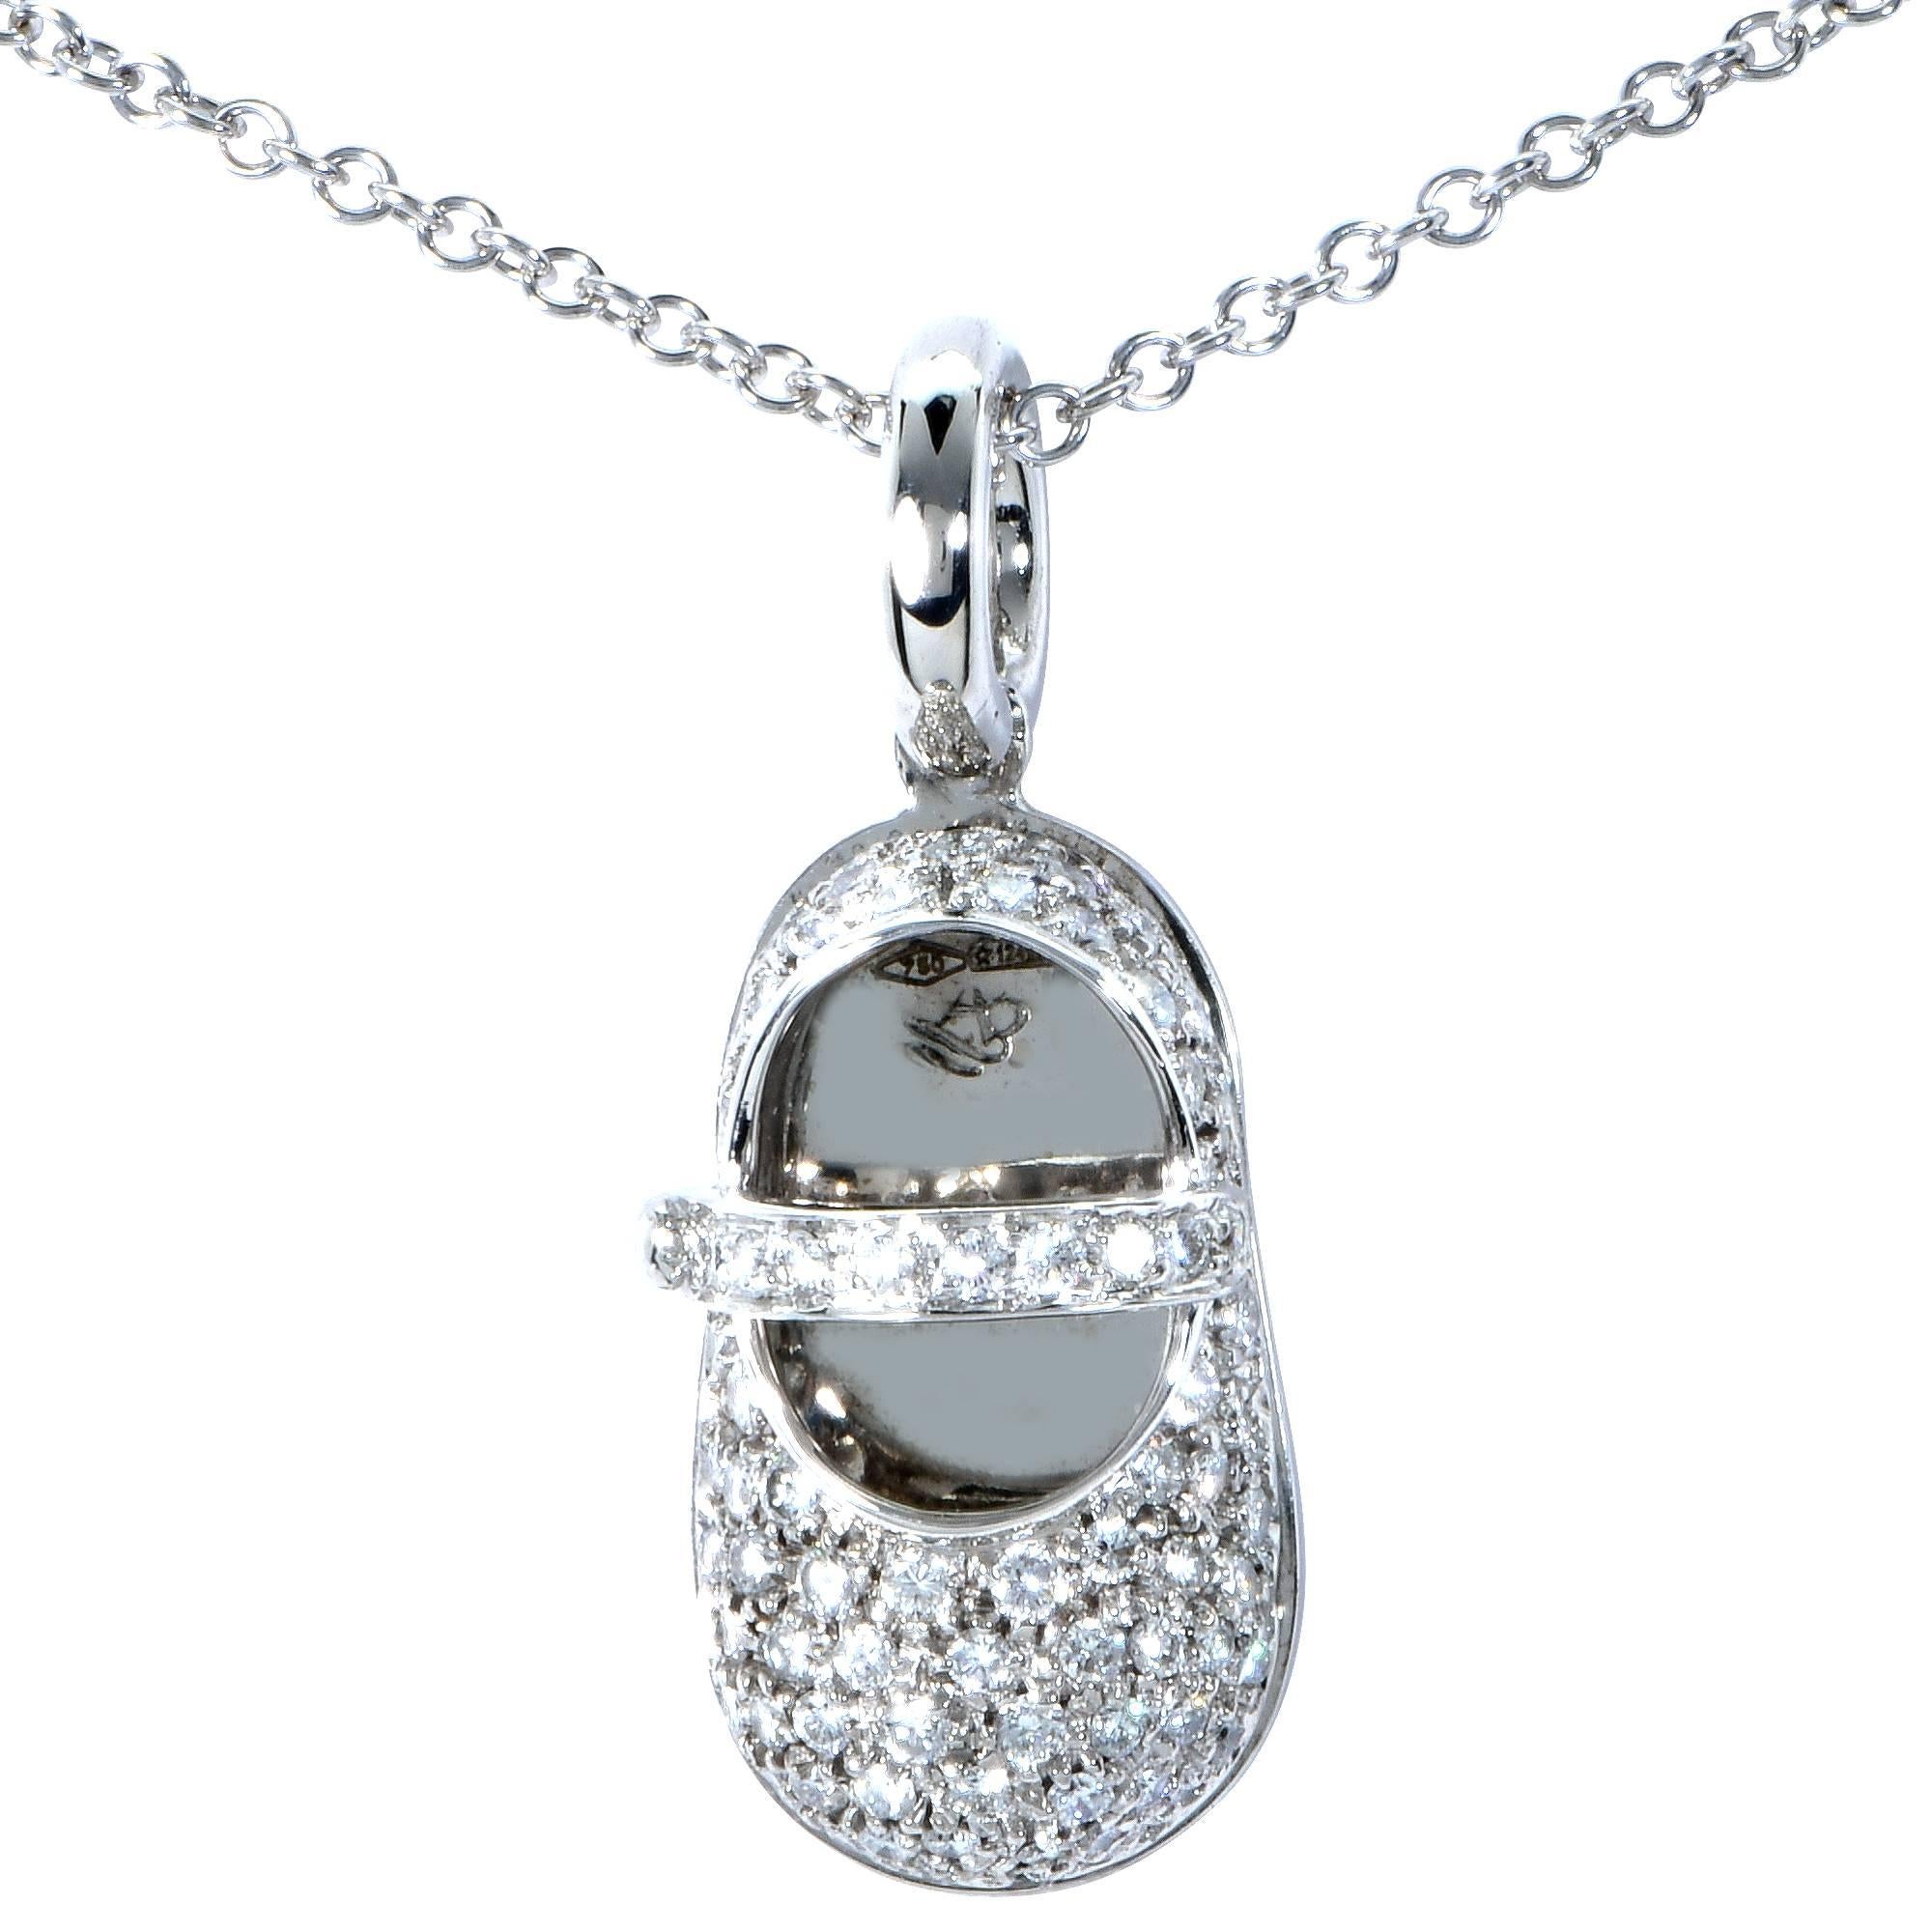 18k white gold Aaron Basha shoe pendant featuring 95 carefully selected round brilliant cut diamonds weighing approximately 1ct total G color VS clarity.

Measurements are available upon request.
It is stamped and/or tested as 18k gold.
The metal